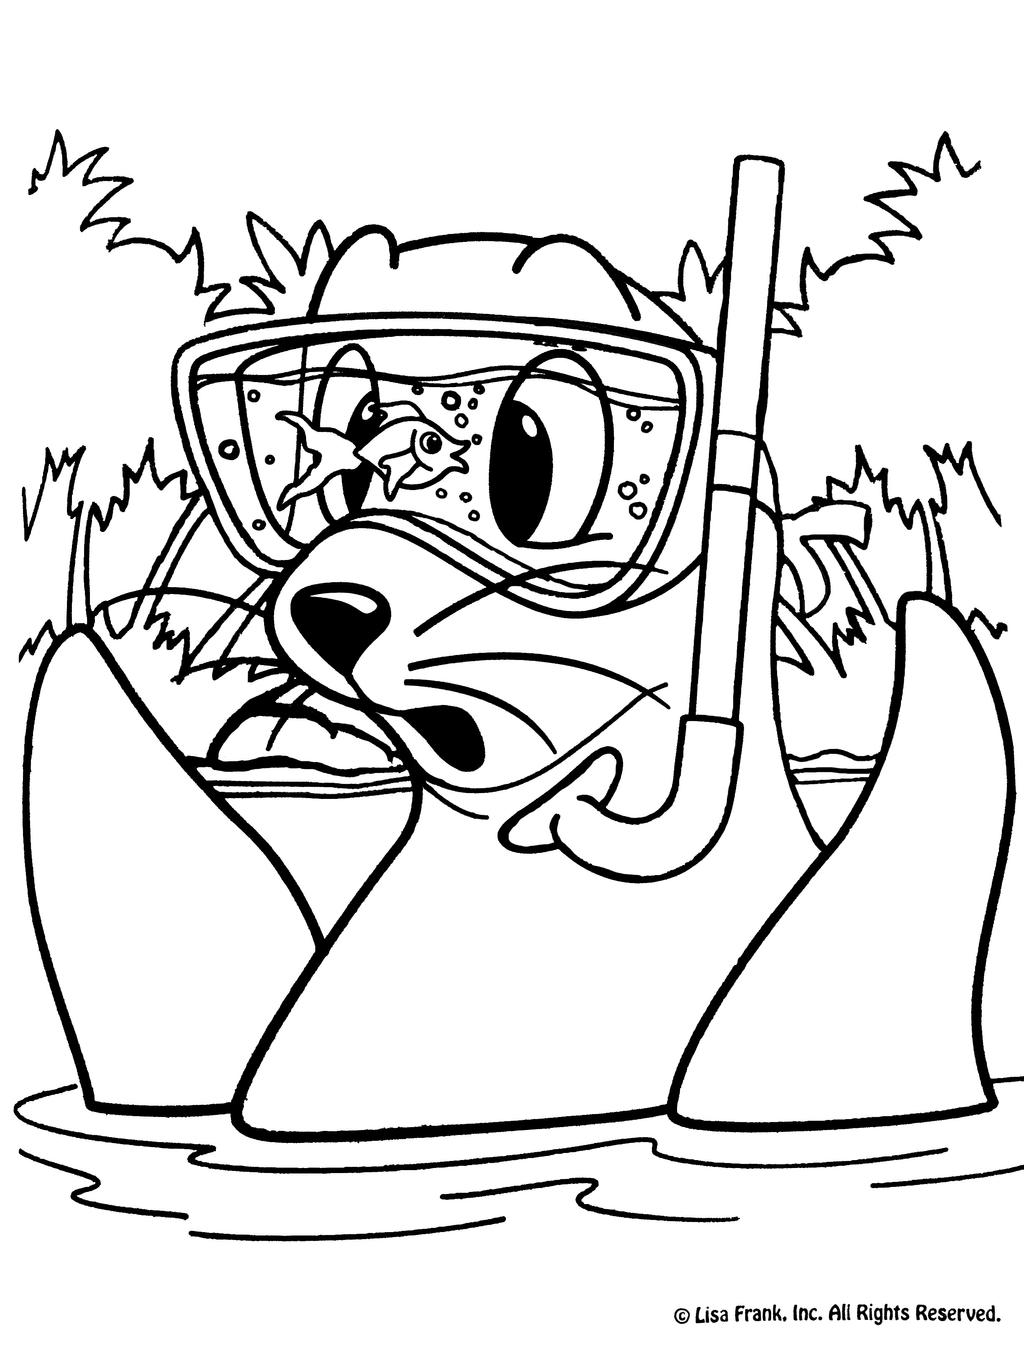 Lisa frank coloring page by tallybaby on